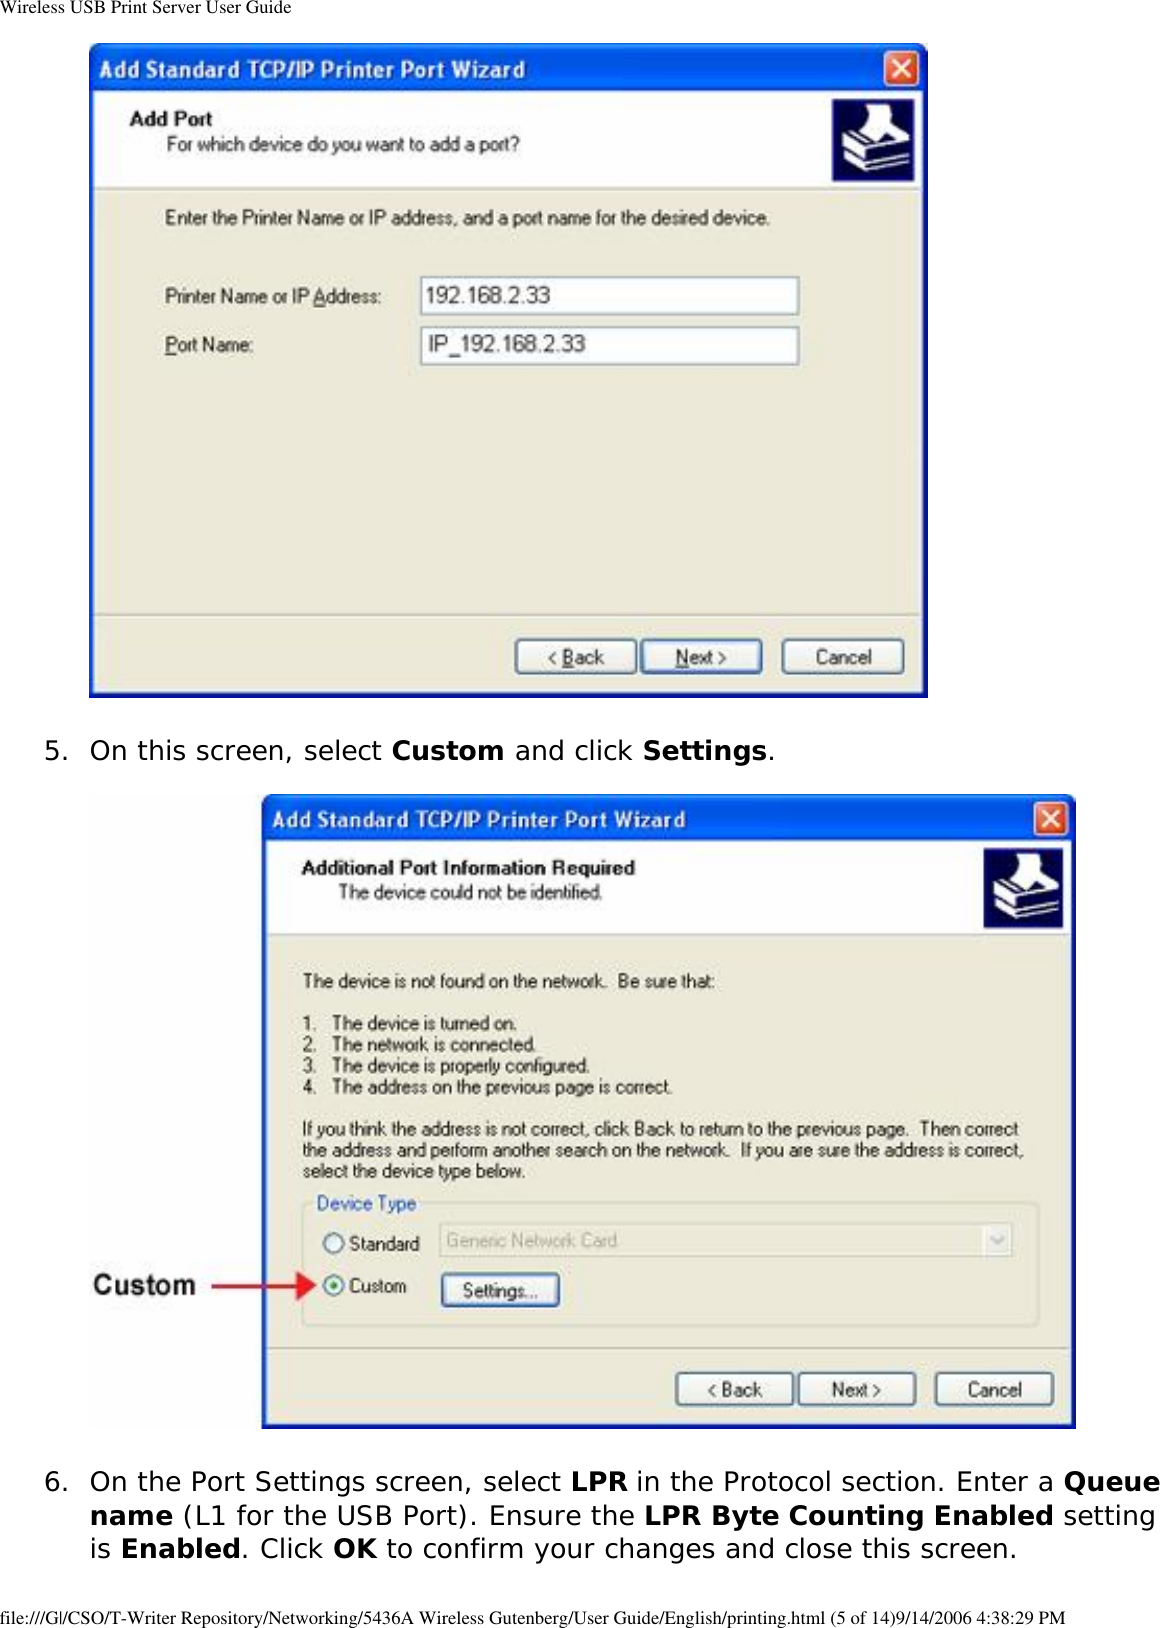 Wireless USB Print Server User Guide 5.  On this screen, select Custom and click Settings.   6.  On the Port Settings screen, select LPR in the Protocol section. Enter a Queue name (L1 for the USB Port). Ensure the LPR Byte Counting Enabled setting is Enabled. Click OK to confirm your changes and close this screen.  file:///G|/CSO/T-Writer Repository/Networking/5436A Wireless Gutenberg/User Guide/English/printing.html (5 of 14)9/14/2006 4:38:29 PM